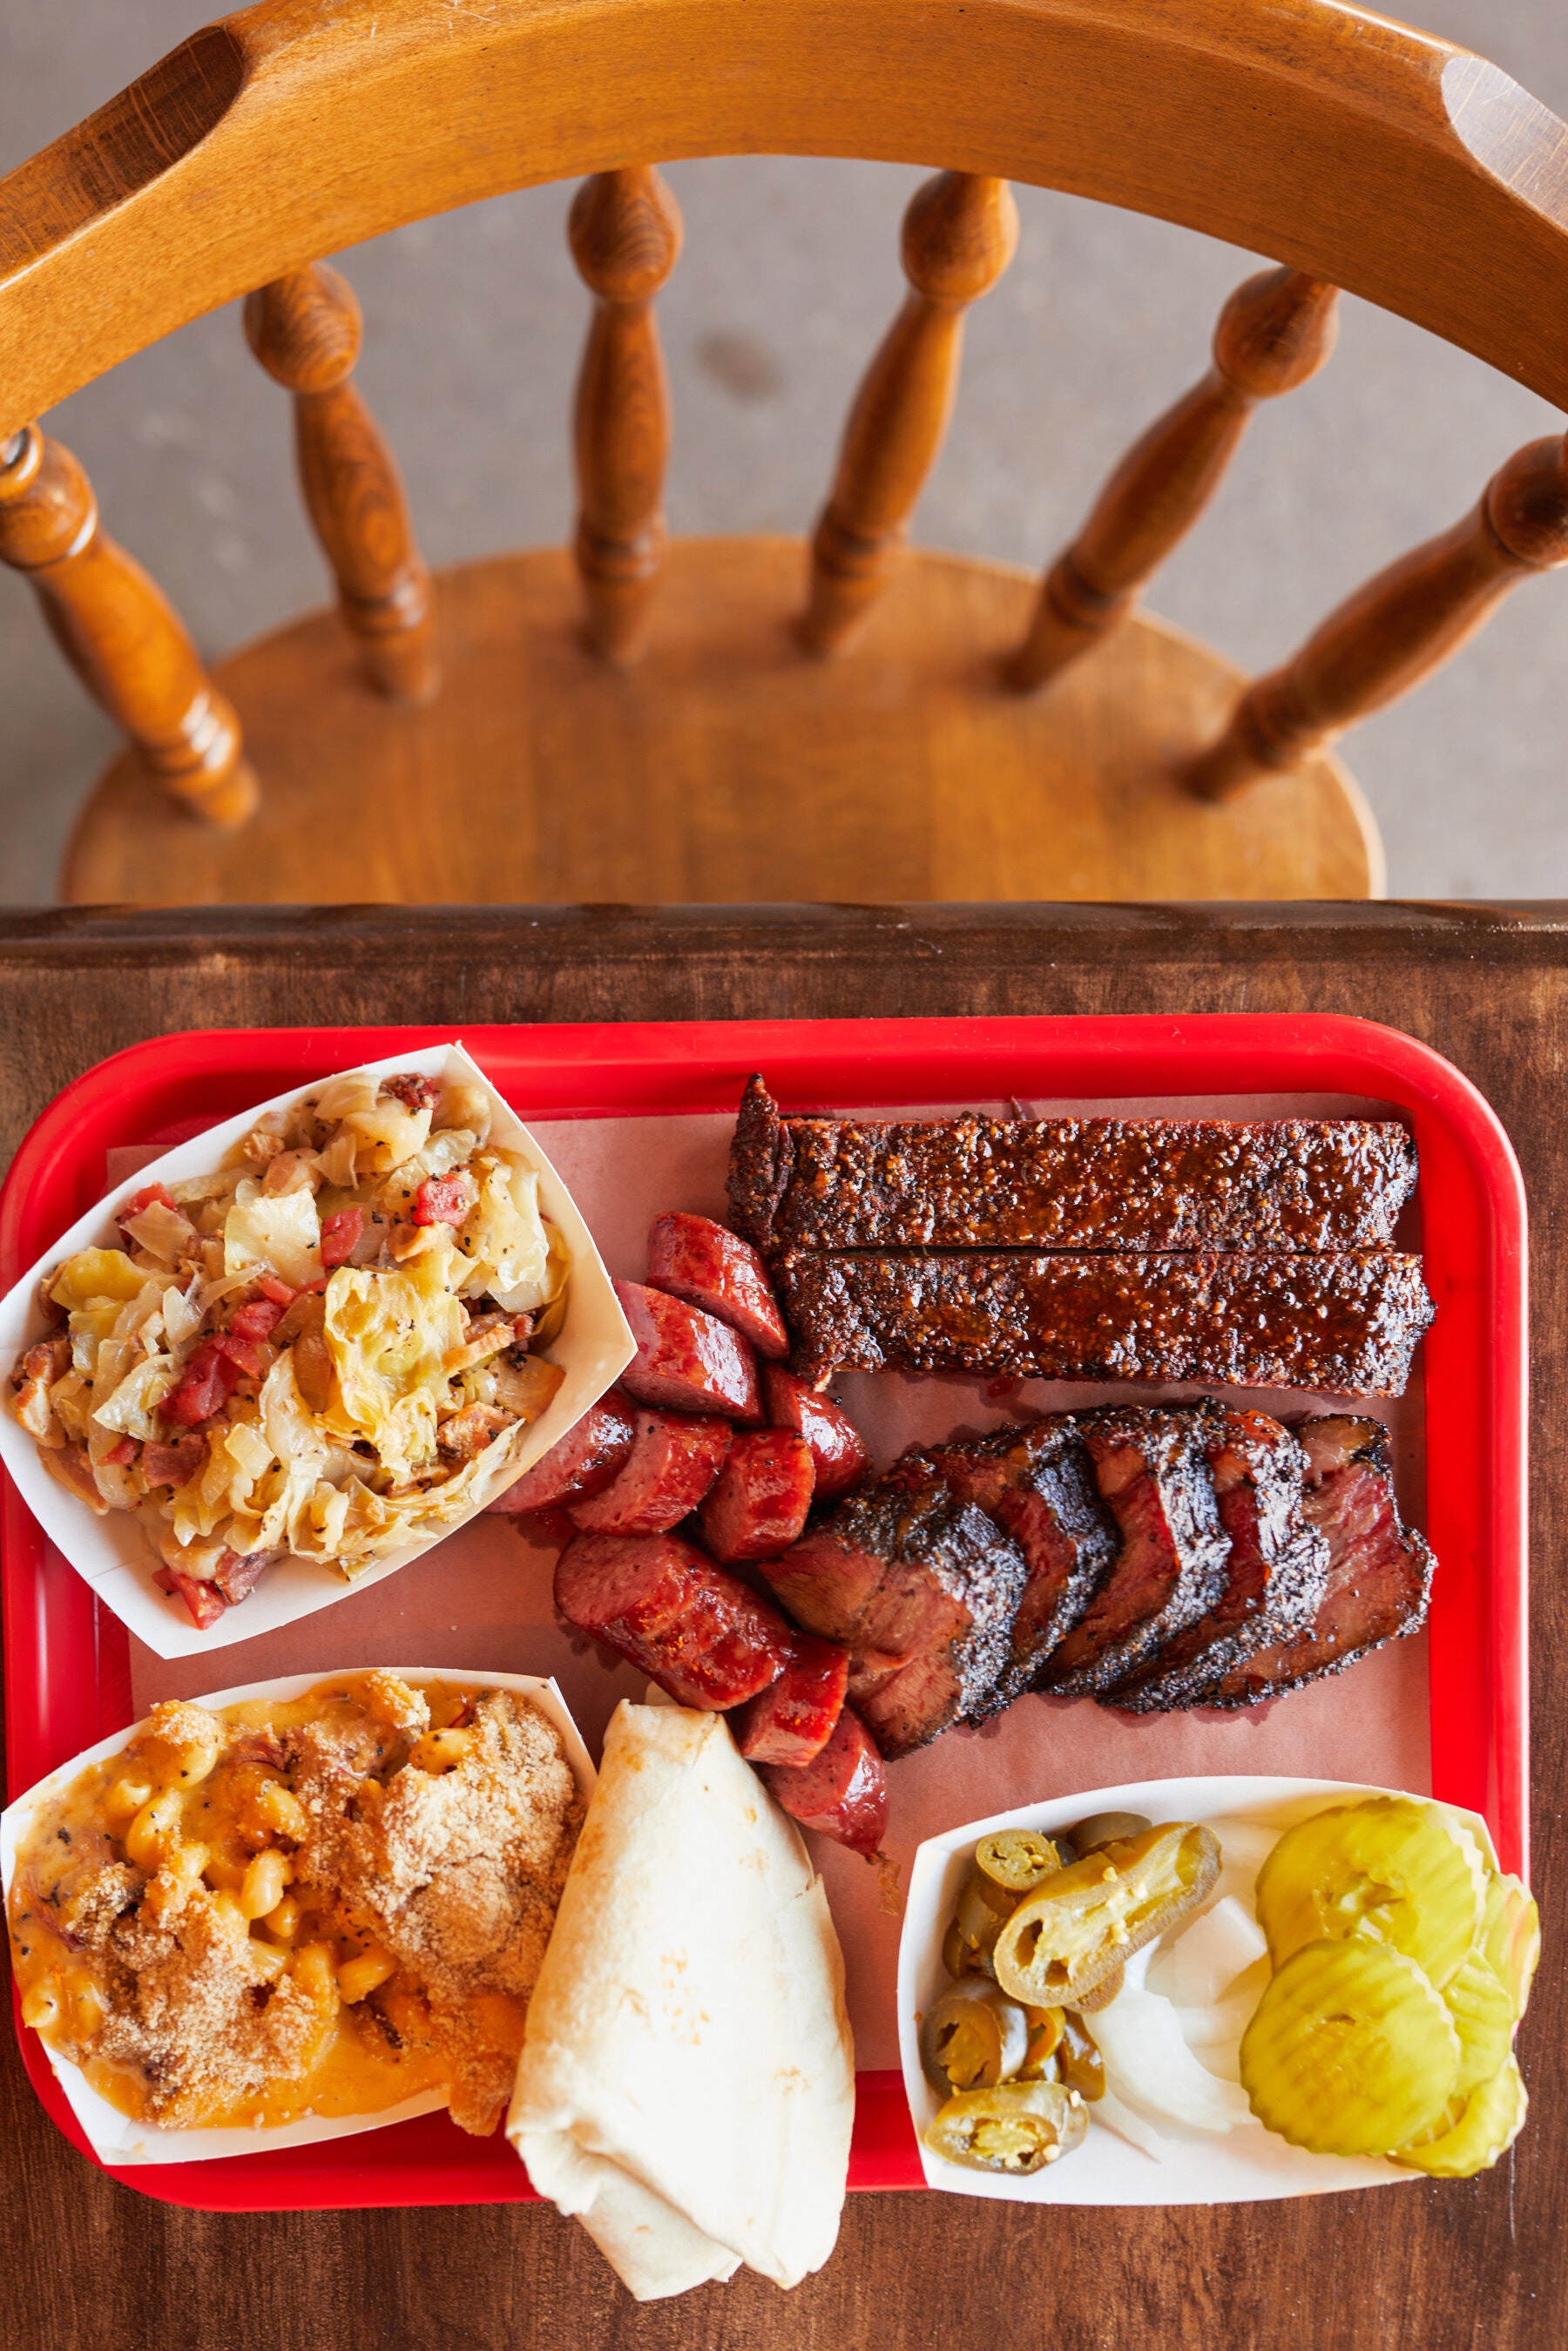 The 20 Best Texas Barbecue Restaurants From the New Generation